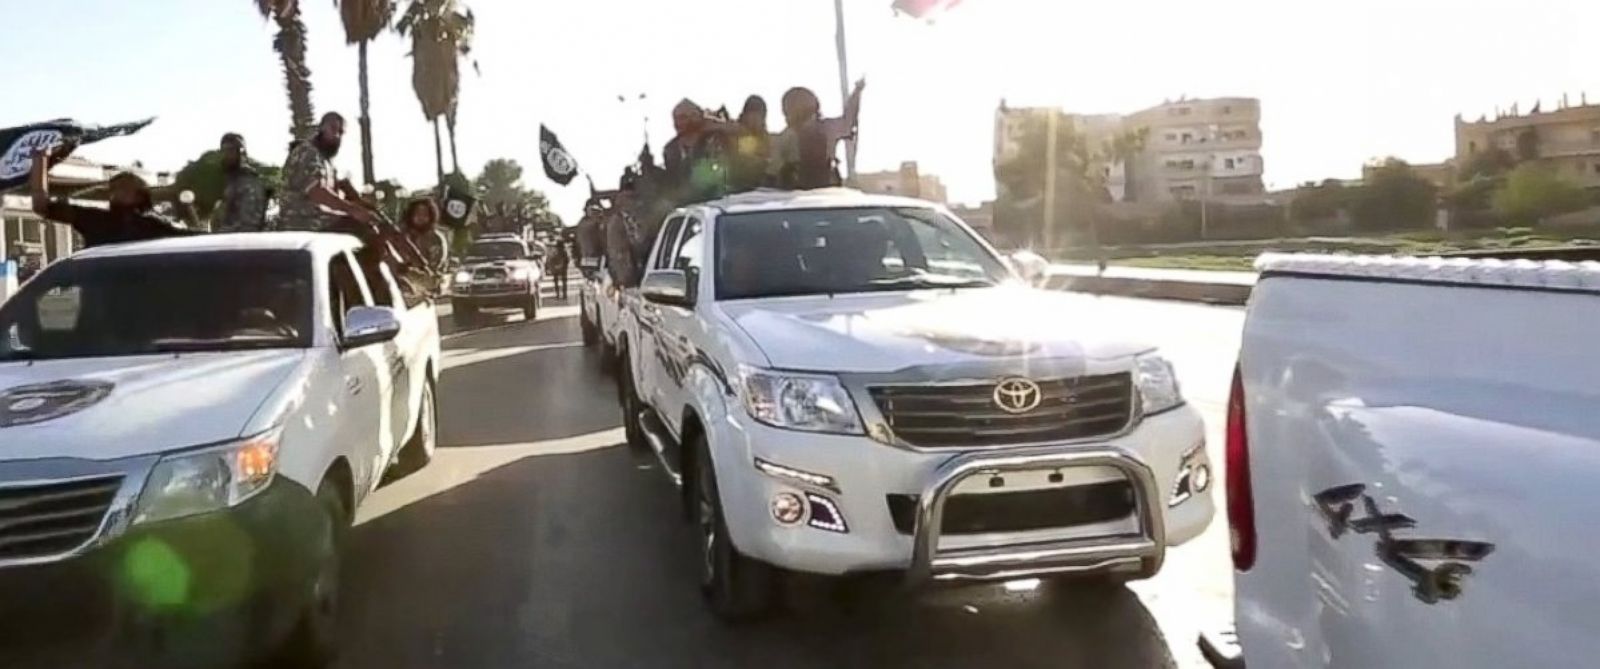 PHOTO: ISIS fighters parade through the streets of Raqqa in a propaganda video released online in July 2014.